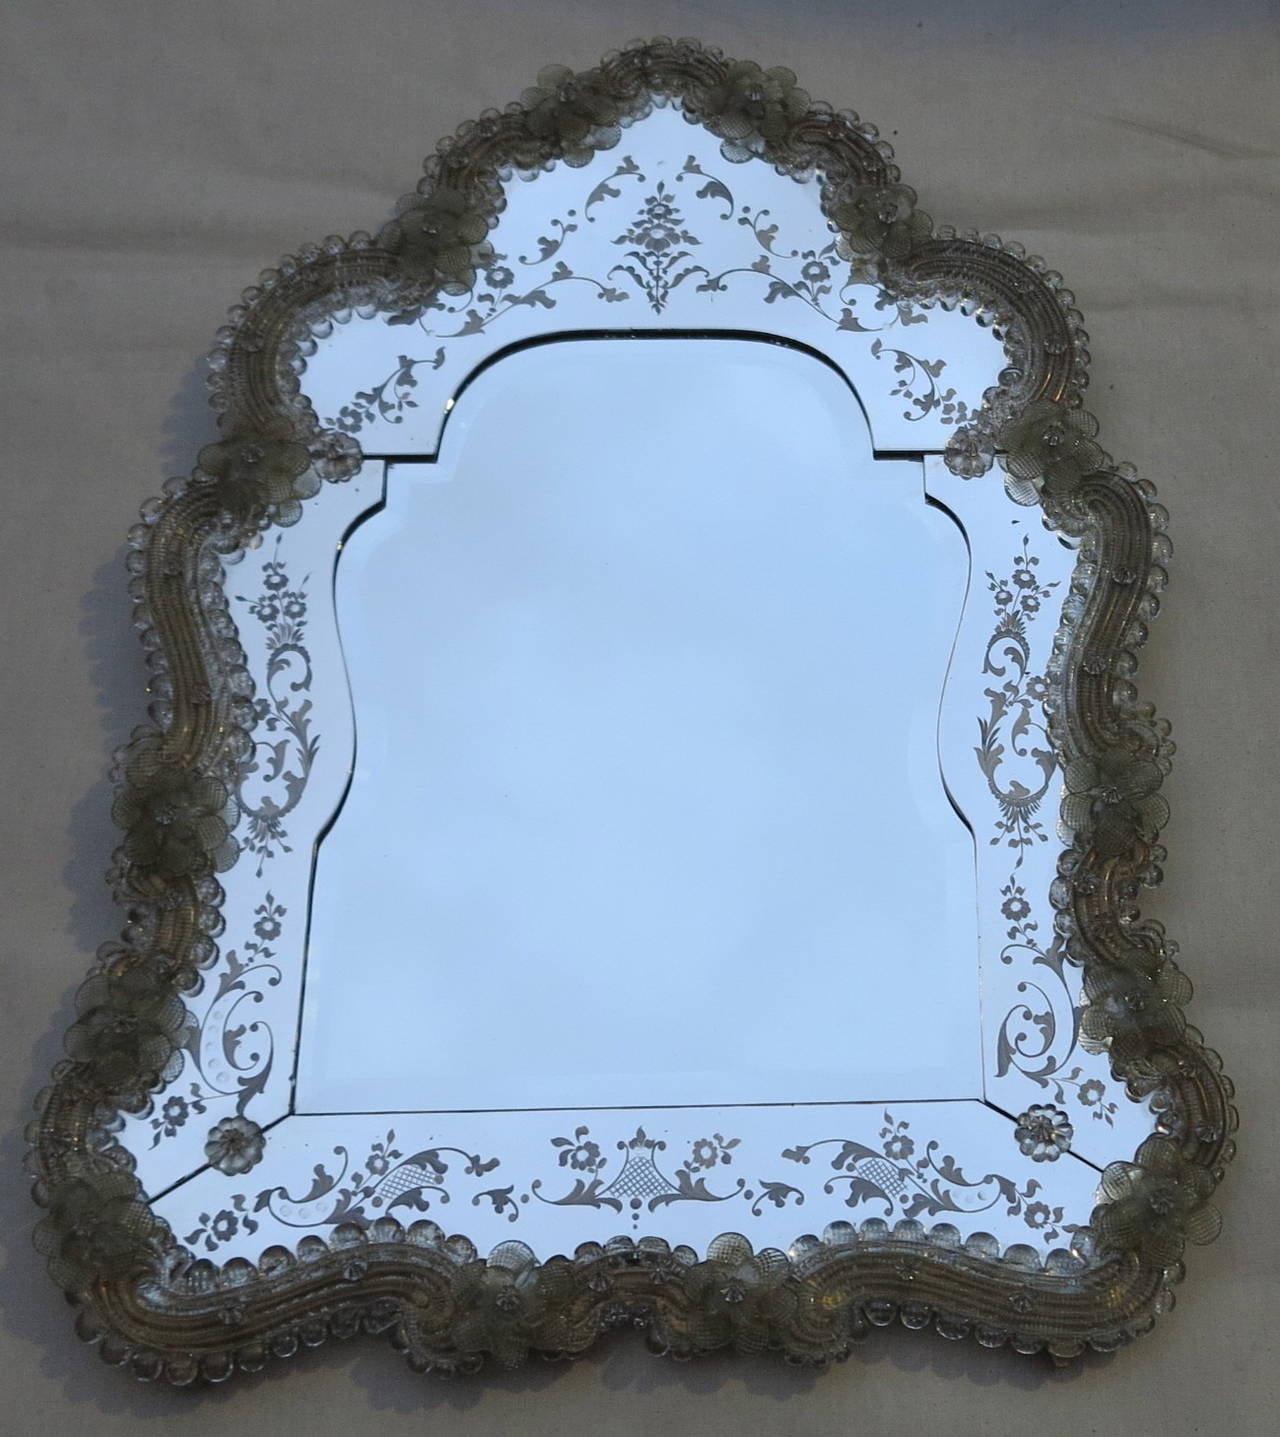 Mirror decorated with flowers and jagged golden meandering gold, central mirror is beveled, good condition, circa 1950-1970